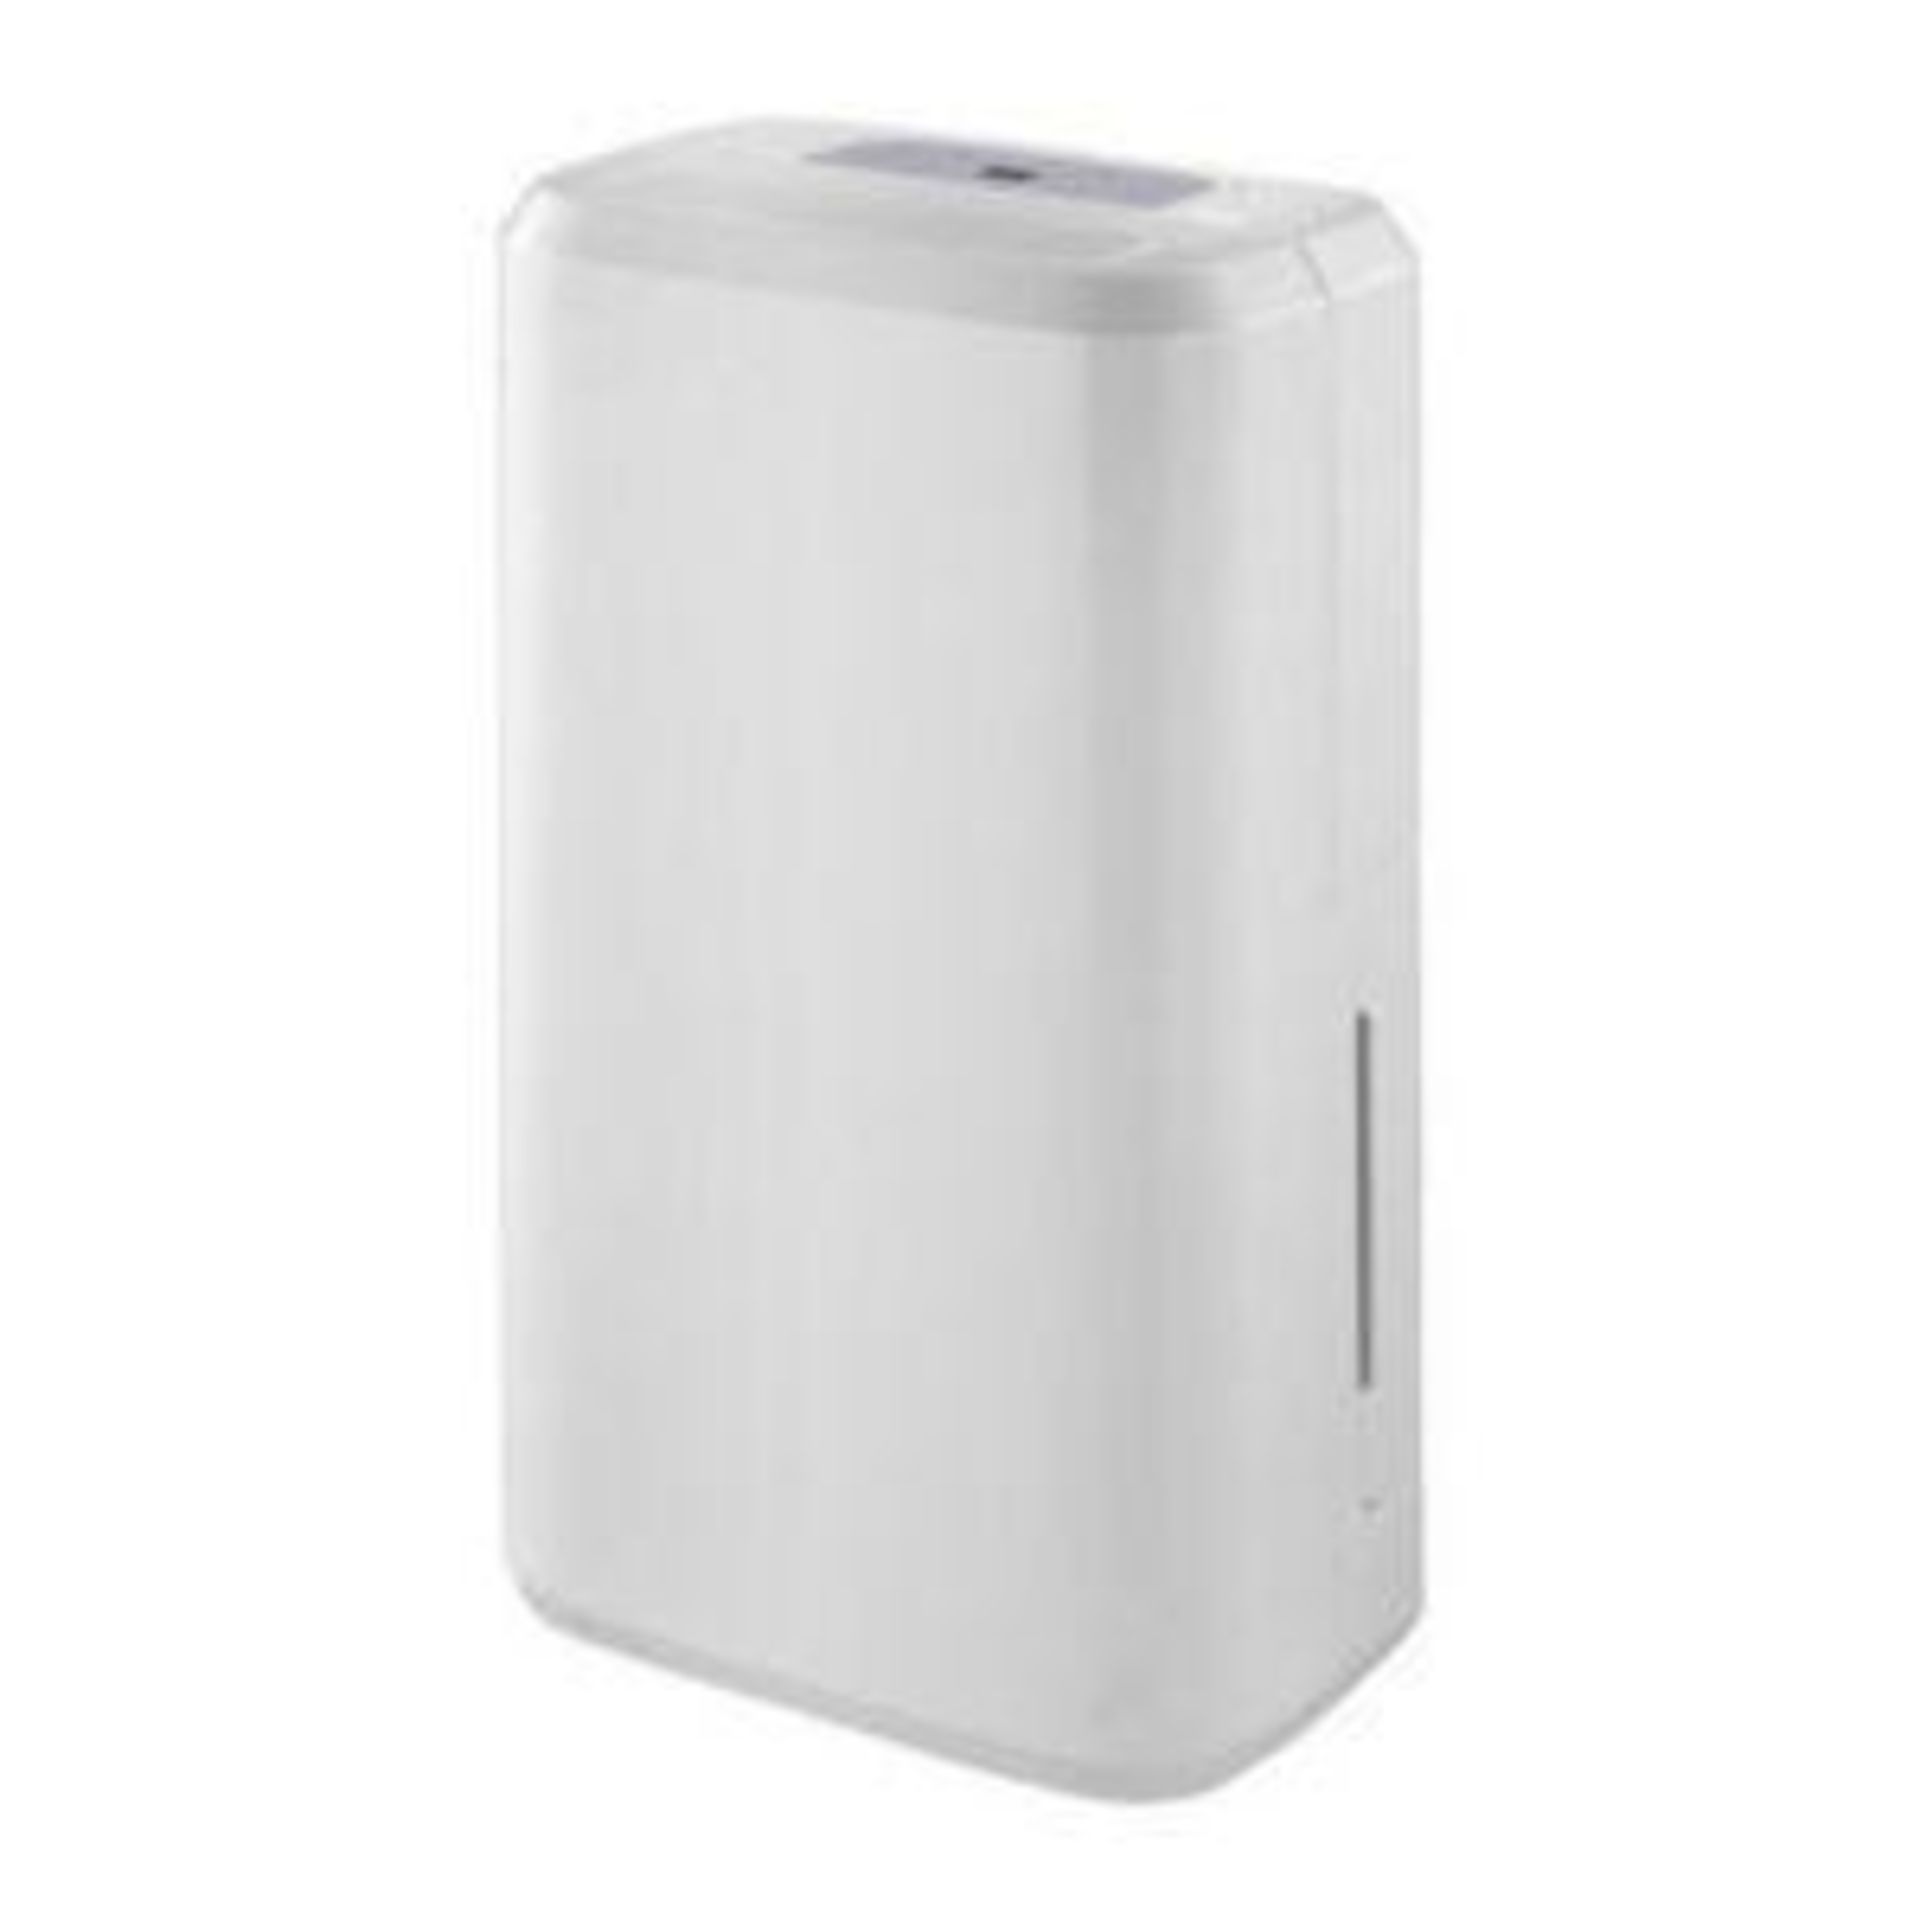 10L Dehumidifier - SR42. 10L Dehumidifier. This dehumidifier is ideal for removing excess moisture